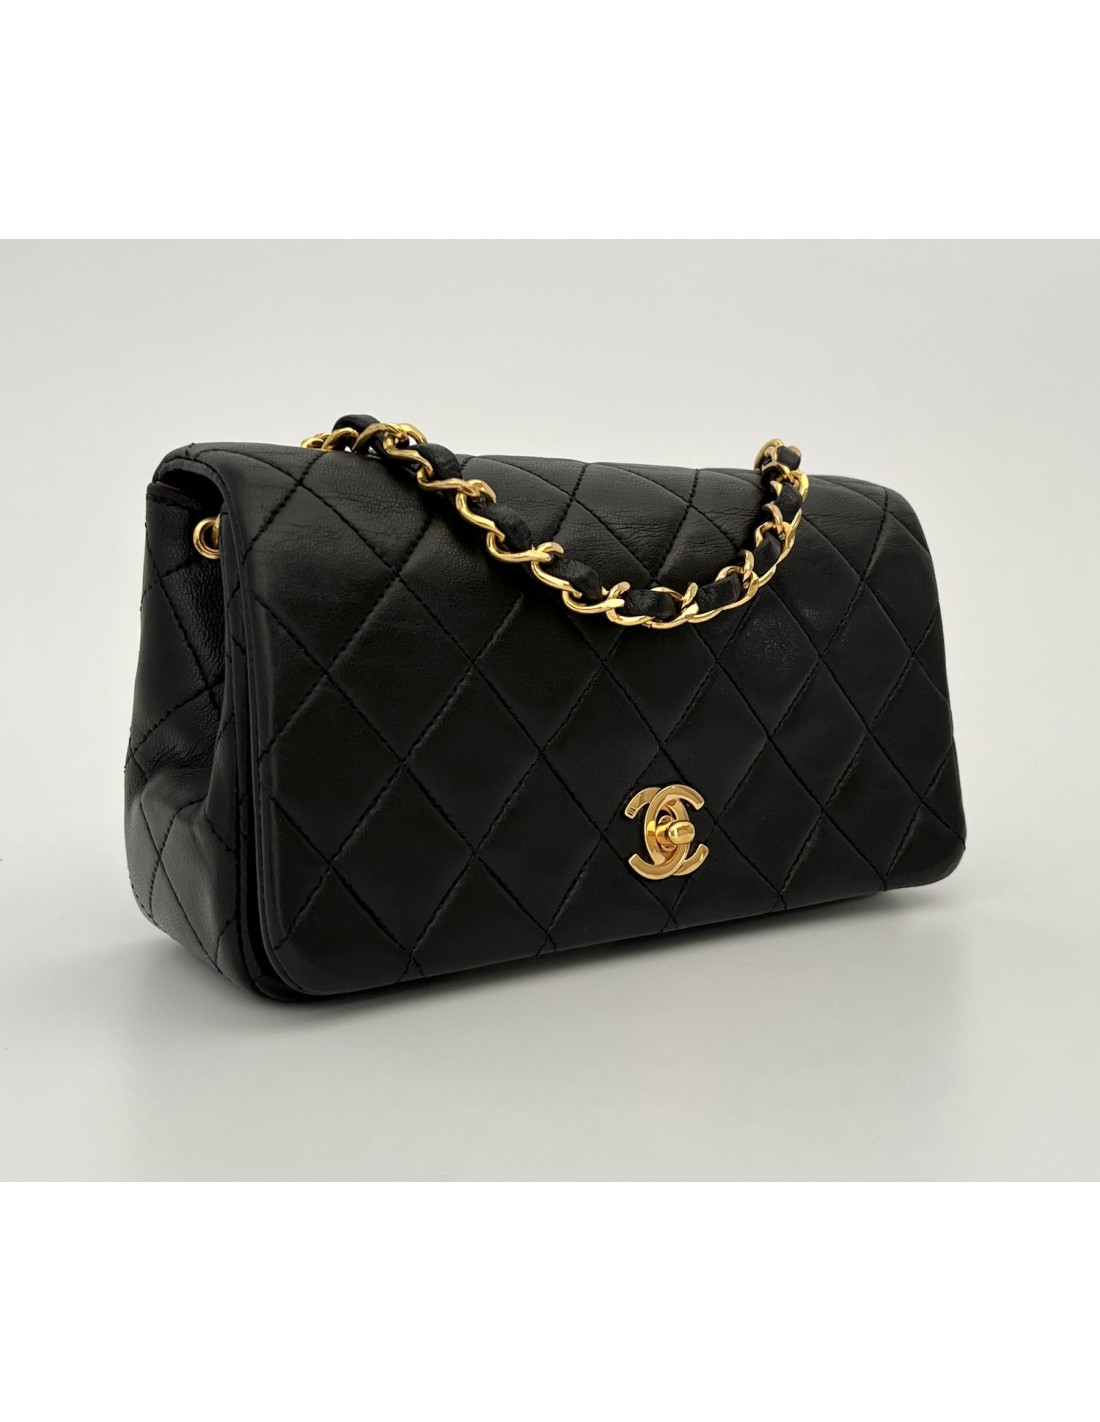 History and Facts About Classic Chanel 2.55 Bag